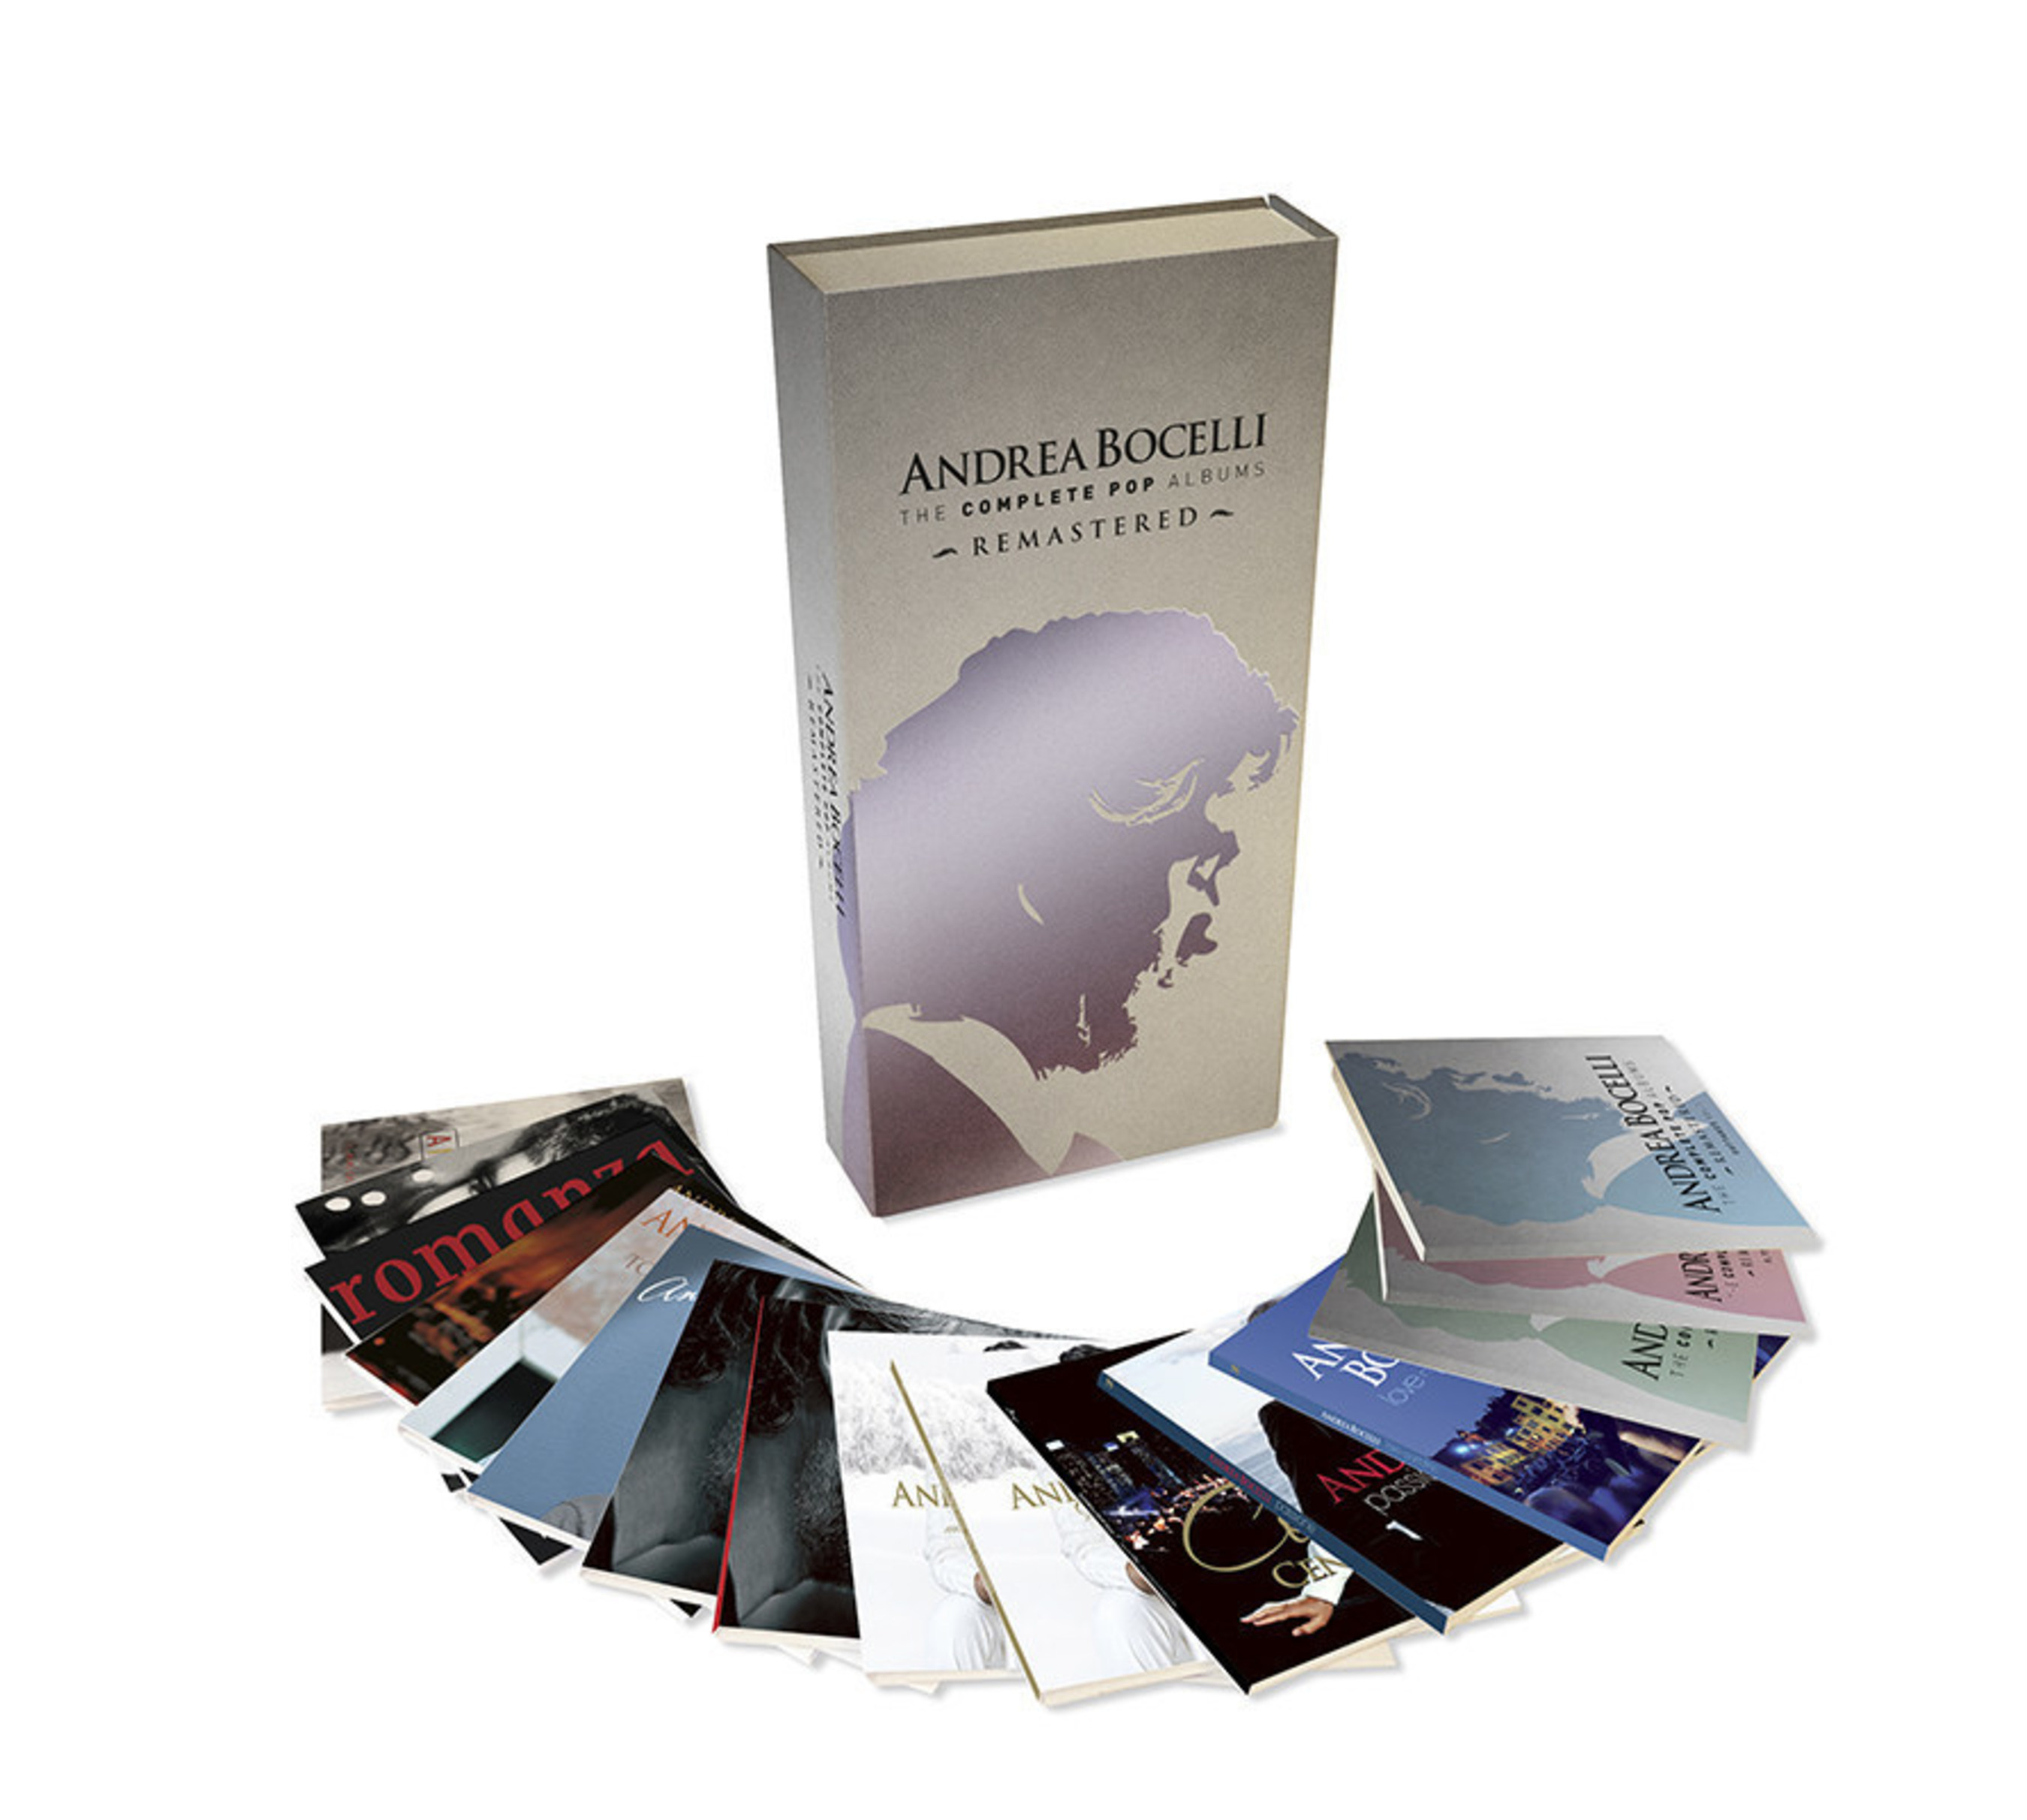 GLOBAL SUPERSTAR ANDREA BOCELLI  -  THE COMPLETE POP ALBUMS-REMASTERED AVAILABLE IN A BEAUTIFUL 16-CD BOX SET - Thirteen of Renowned Italian Tenor's Remastered Studio Albums Plus 3 Bonus Discs of Rare or Previously Unavailable Material AVAILABLE-July 10, 2015